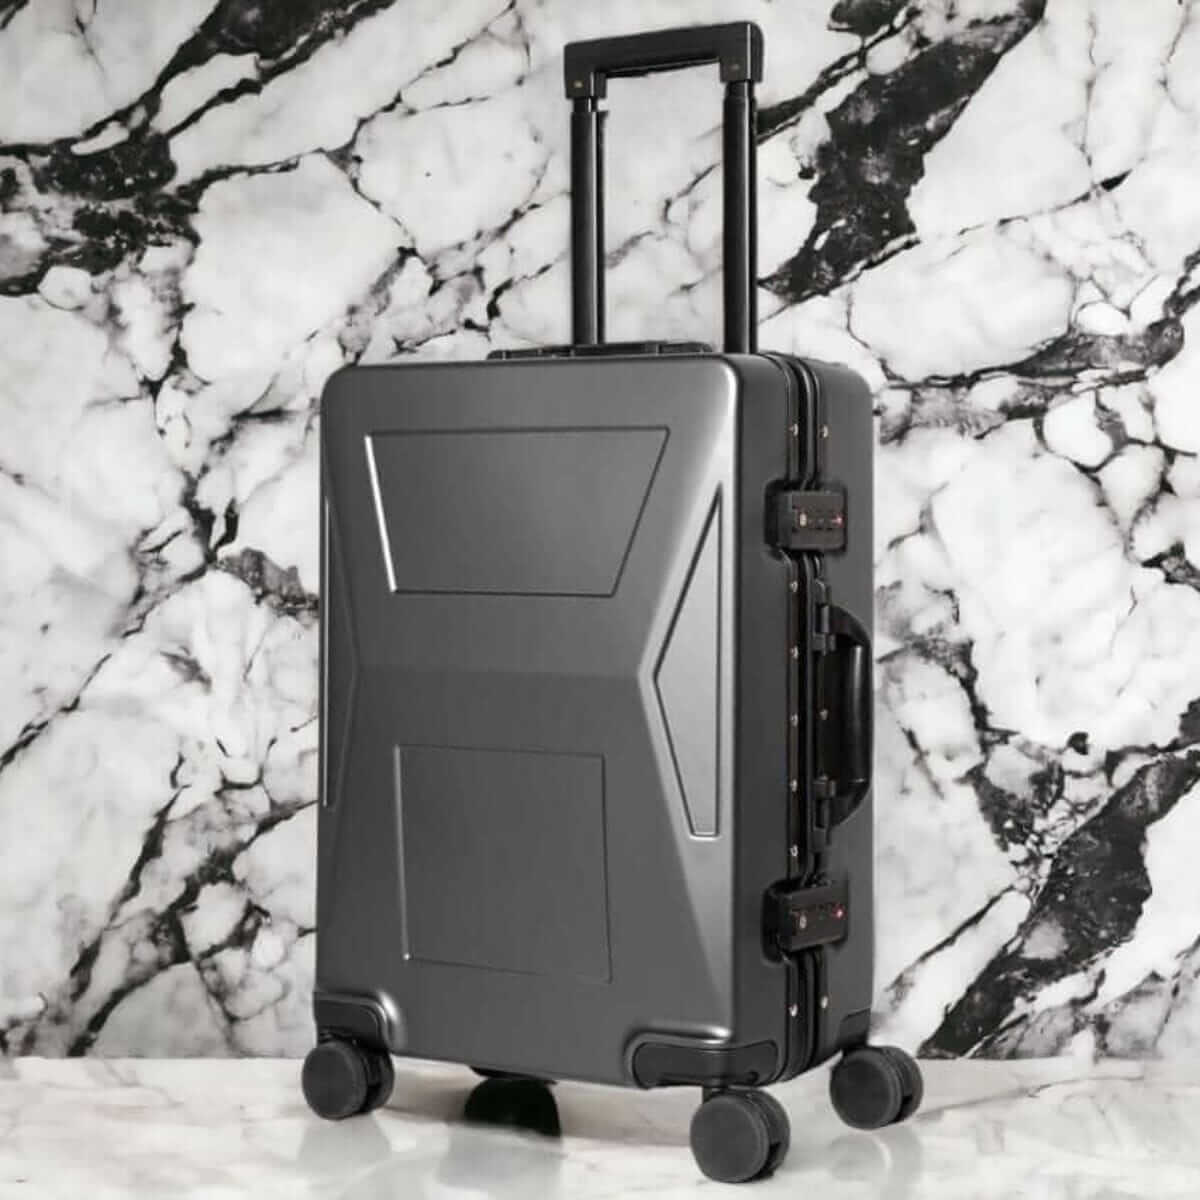 Tumi hardside luggage is on sale on : Save $206 on a new carry-on